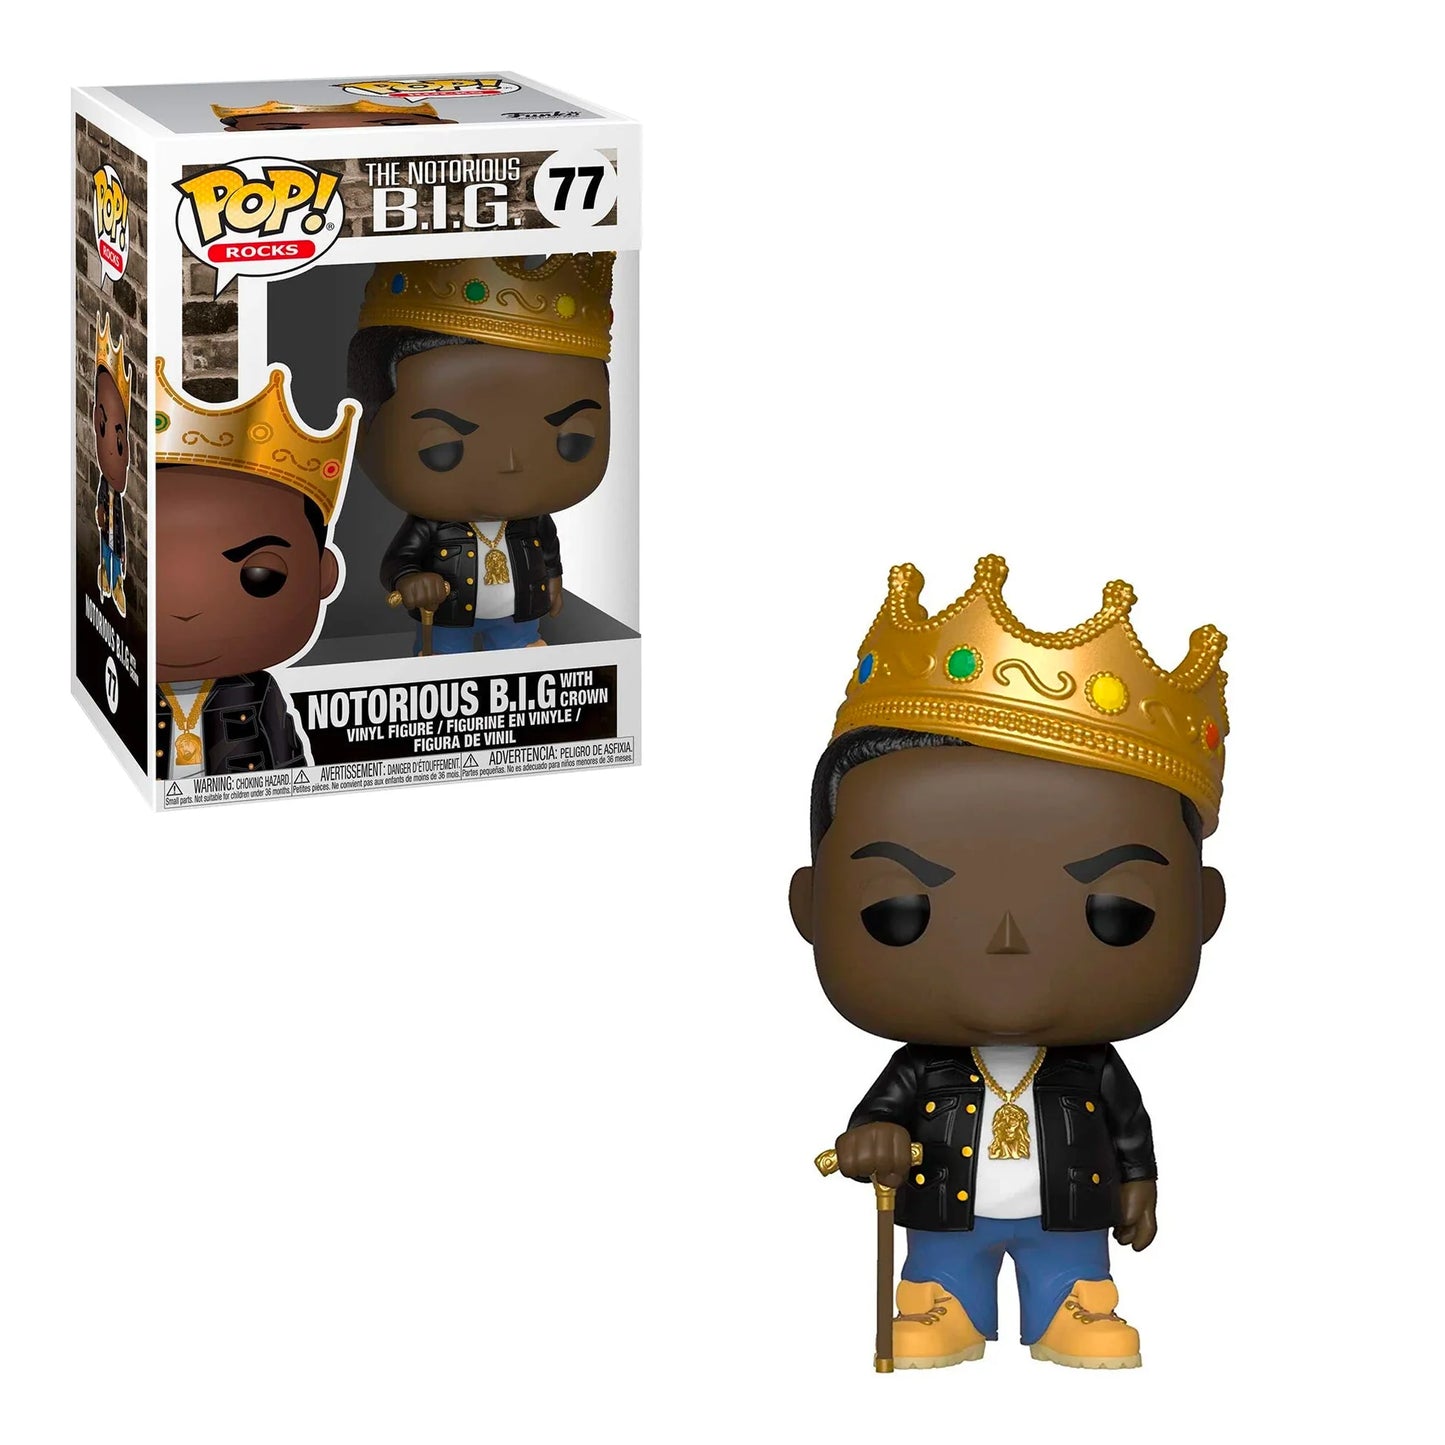 Funko Pop! Rocks - Notorious B.I.G. with crown - 77